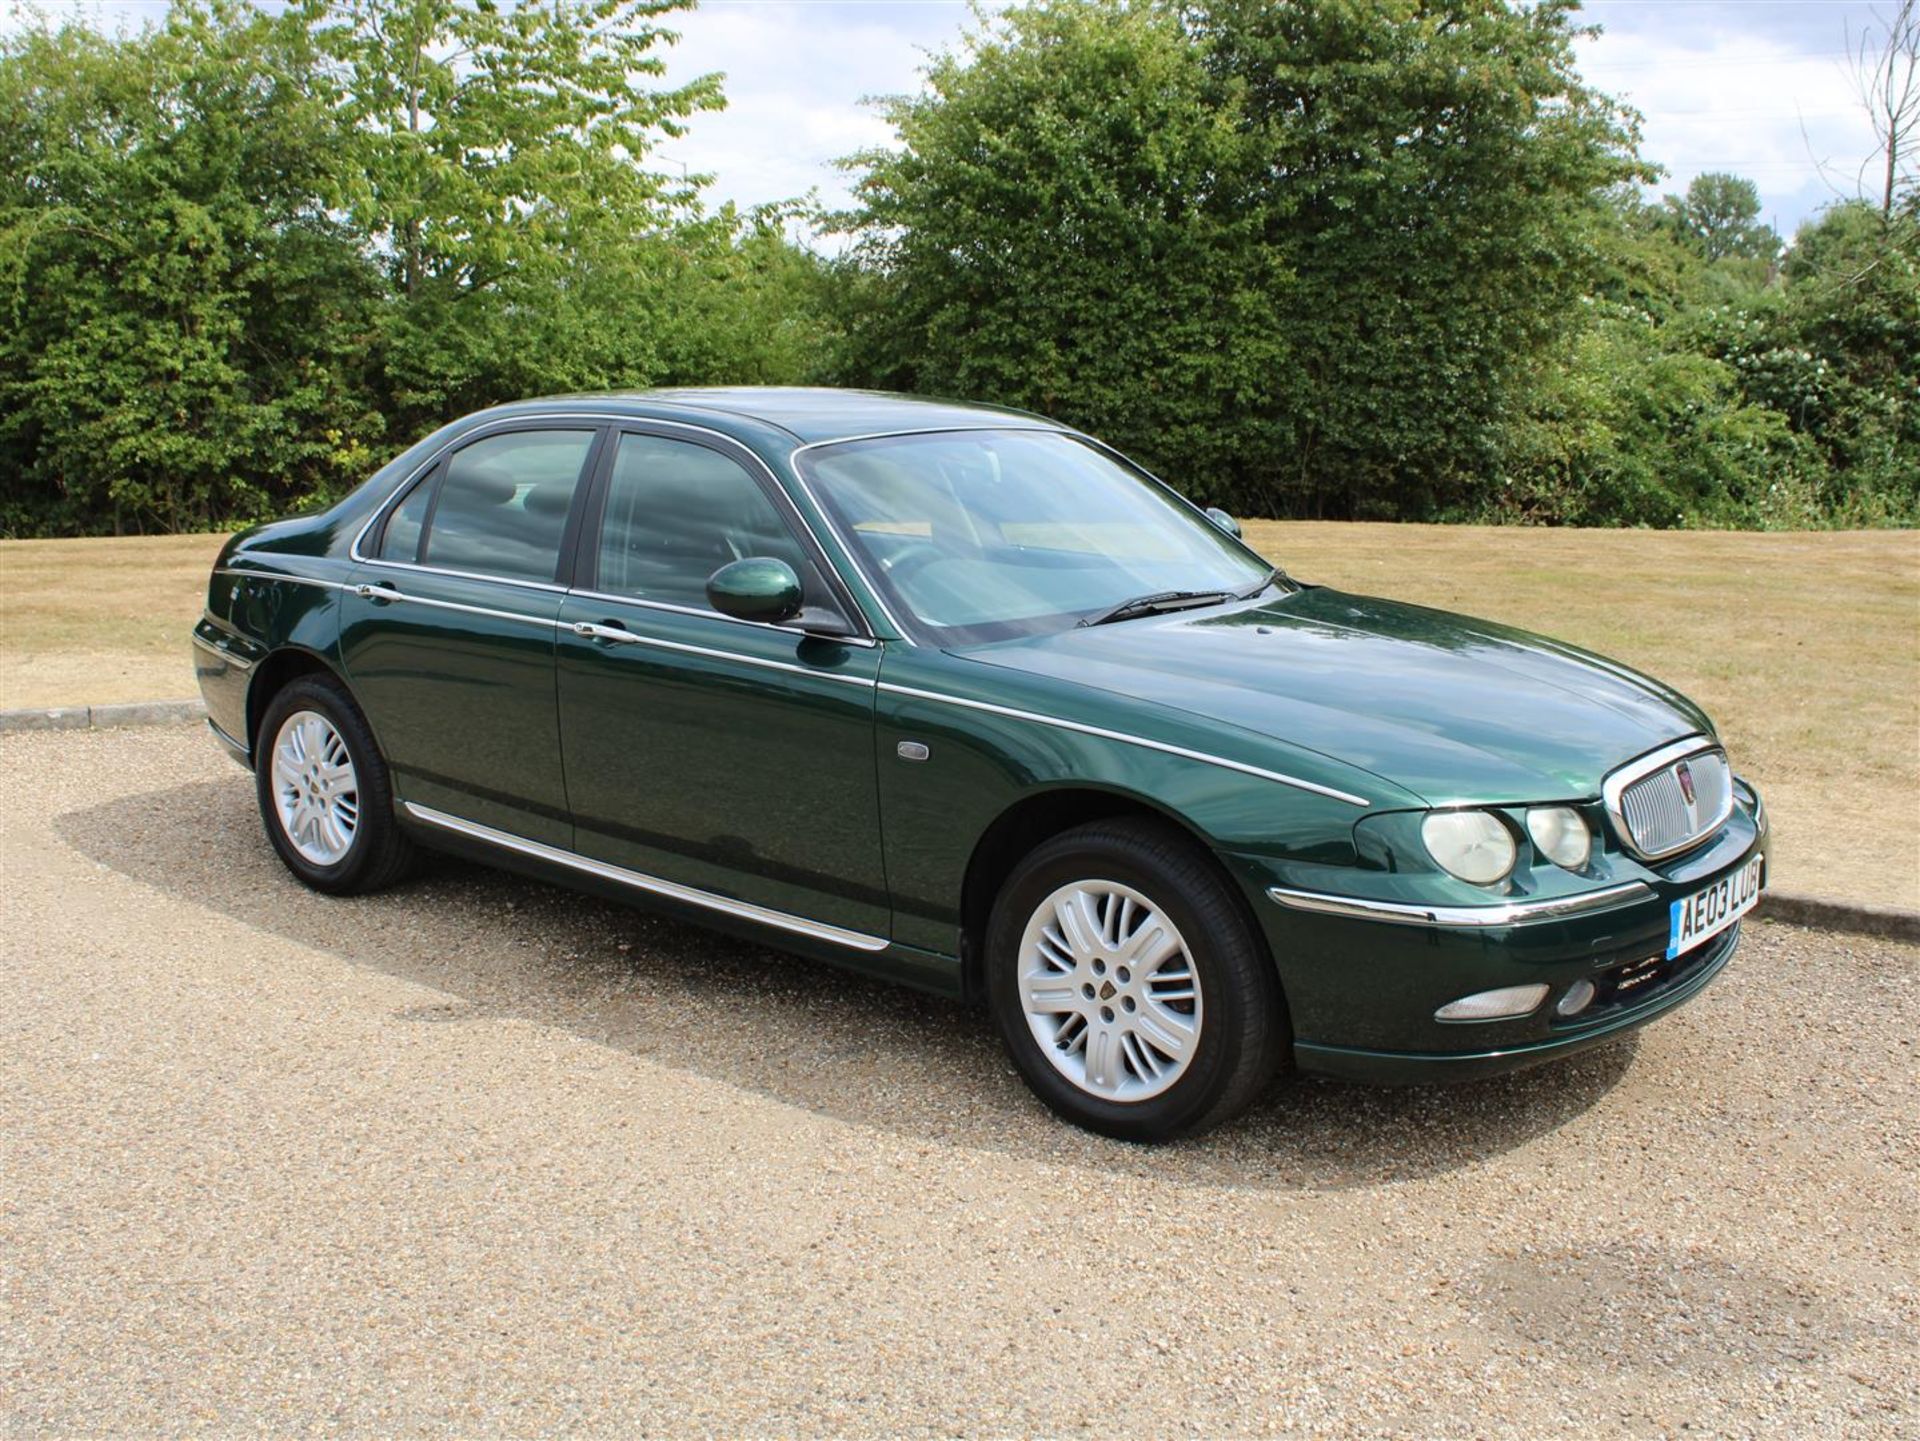 2003 Rover 75 Club 1.8 SE 37,028 miles from new